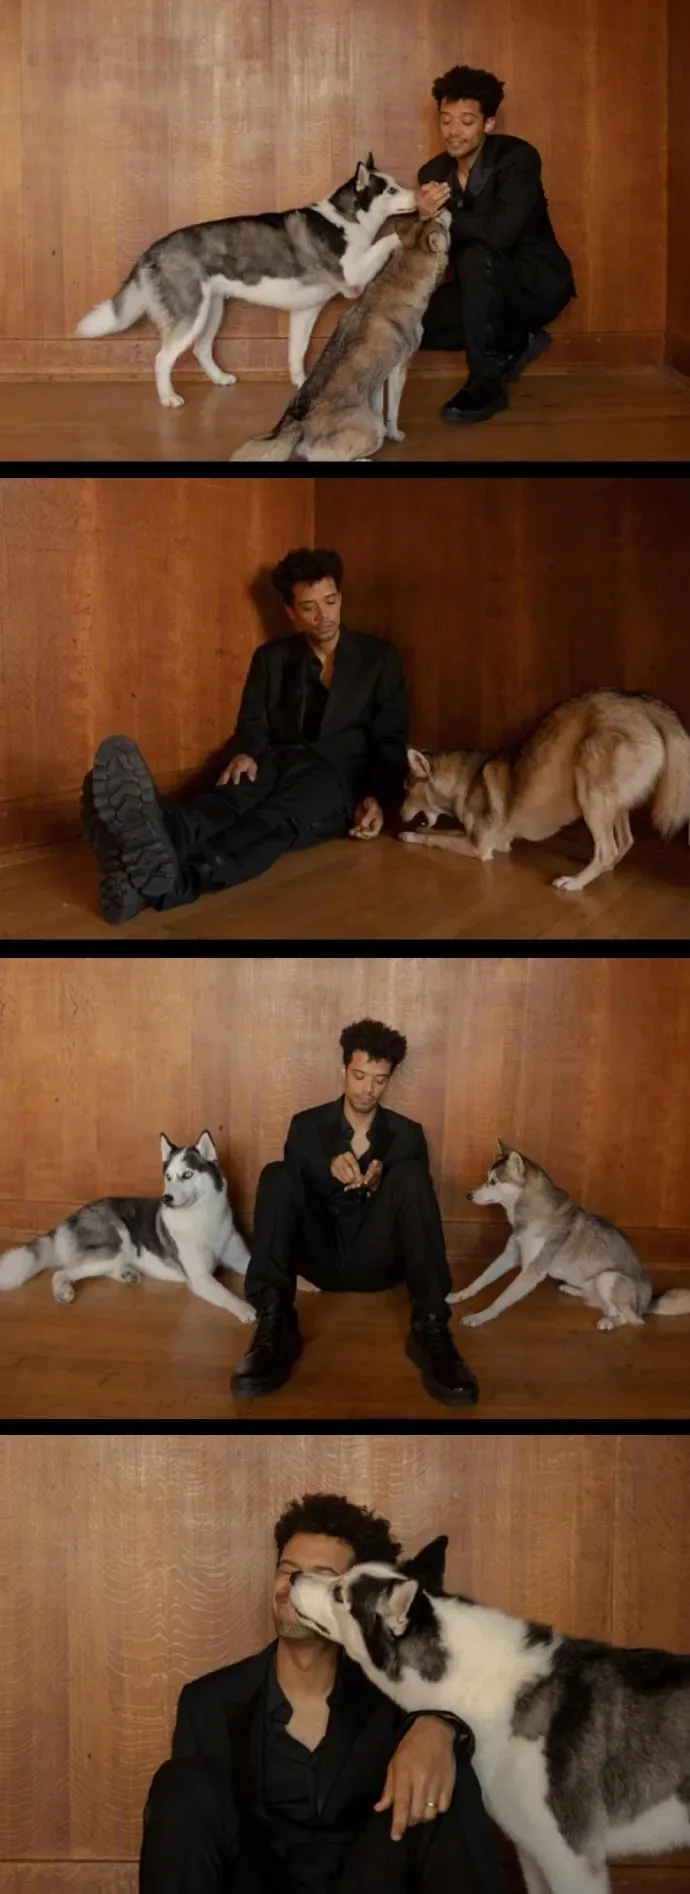 Jacob Anderson, New Photoshoot for 'Foxes' Magazine | FMV6